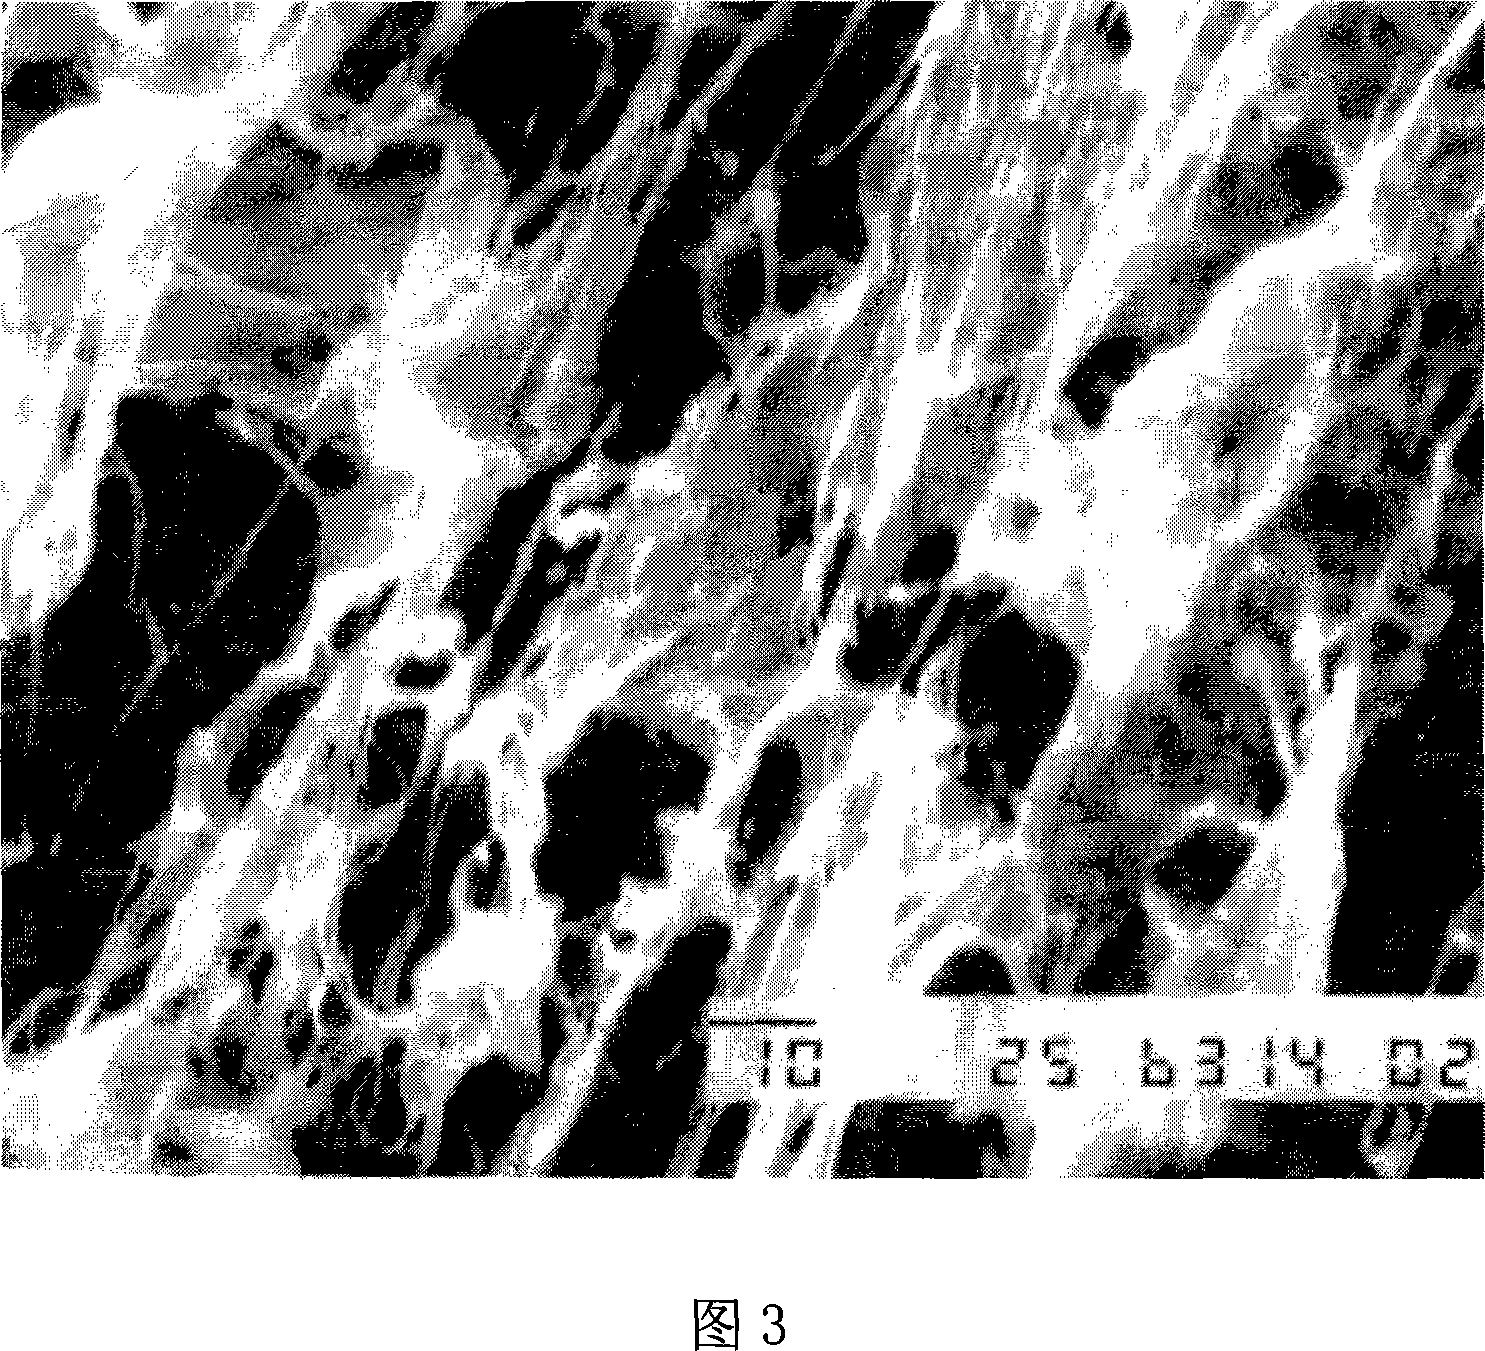 Method for fixing chitosan enzyme by using cross-linking adsorption of chitosan - glutaraldehyde